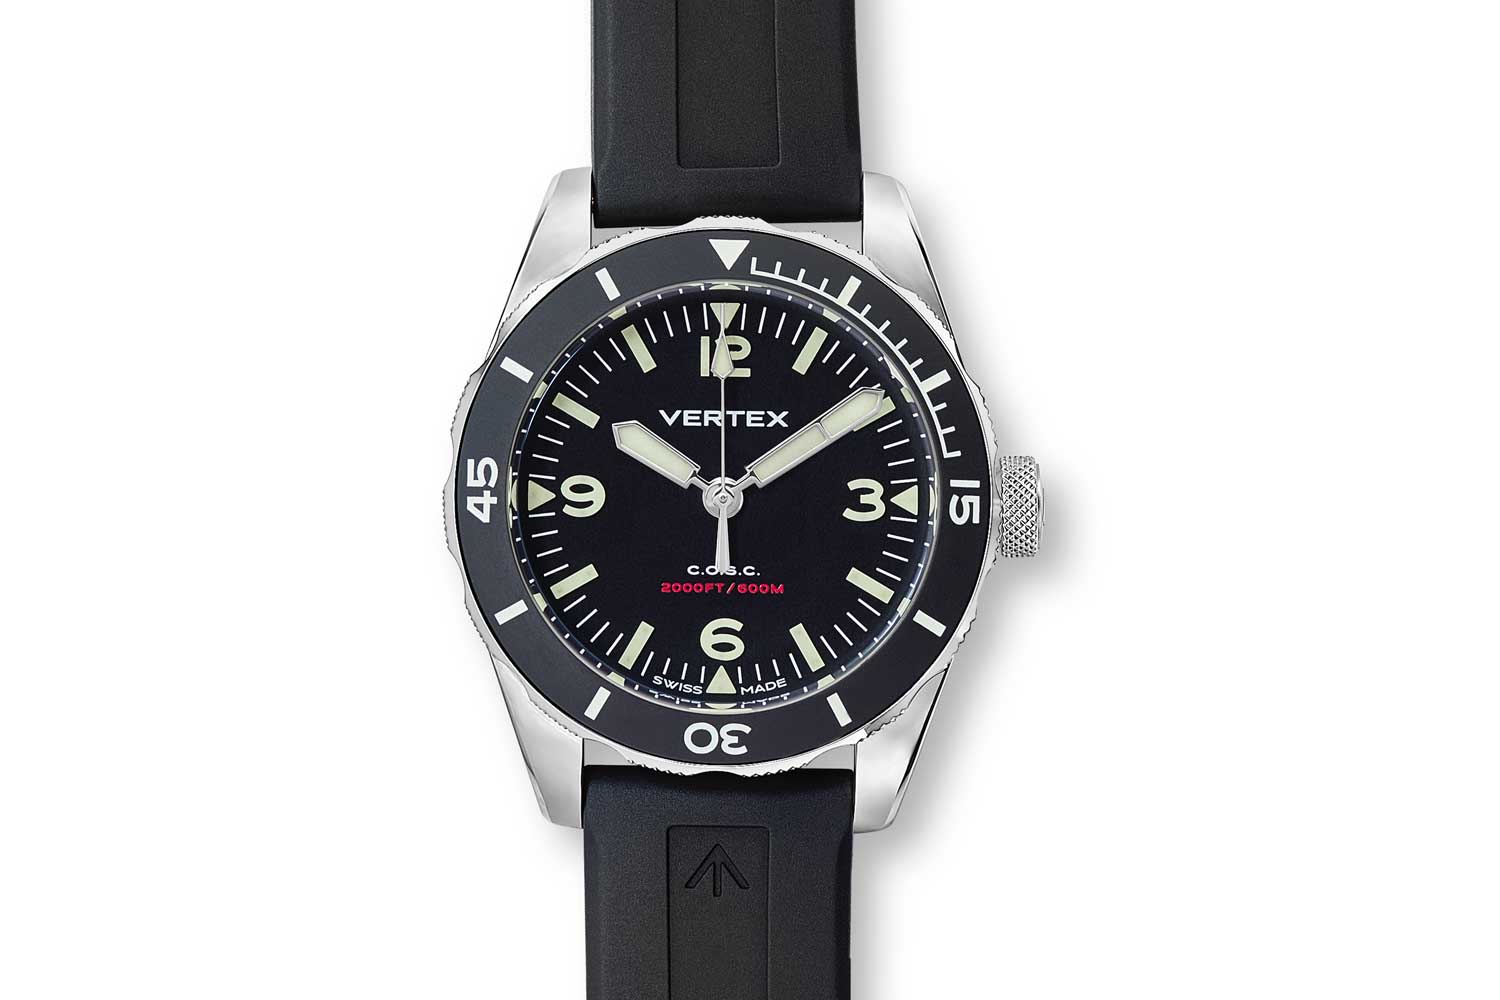 The Vertex M60 AquaLion No-Date on a rubber strap